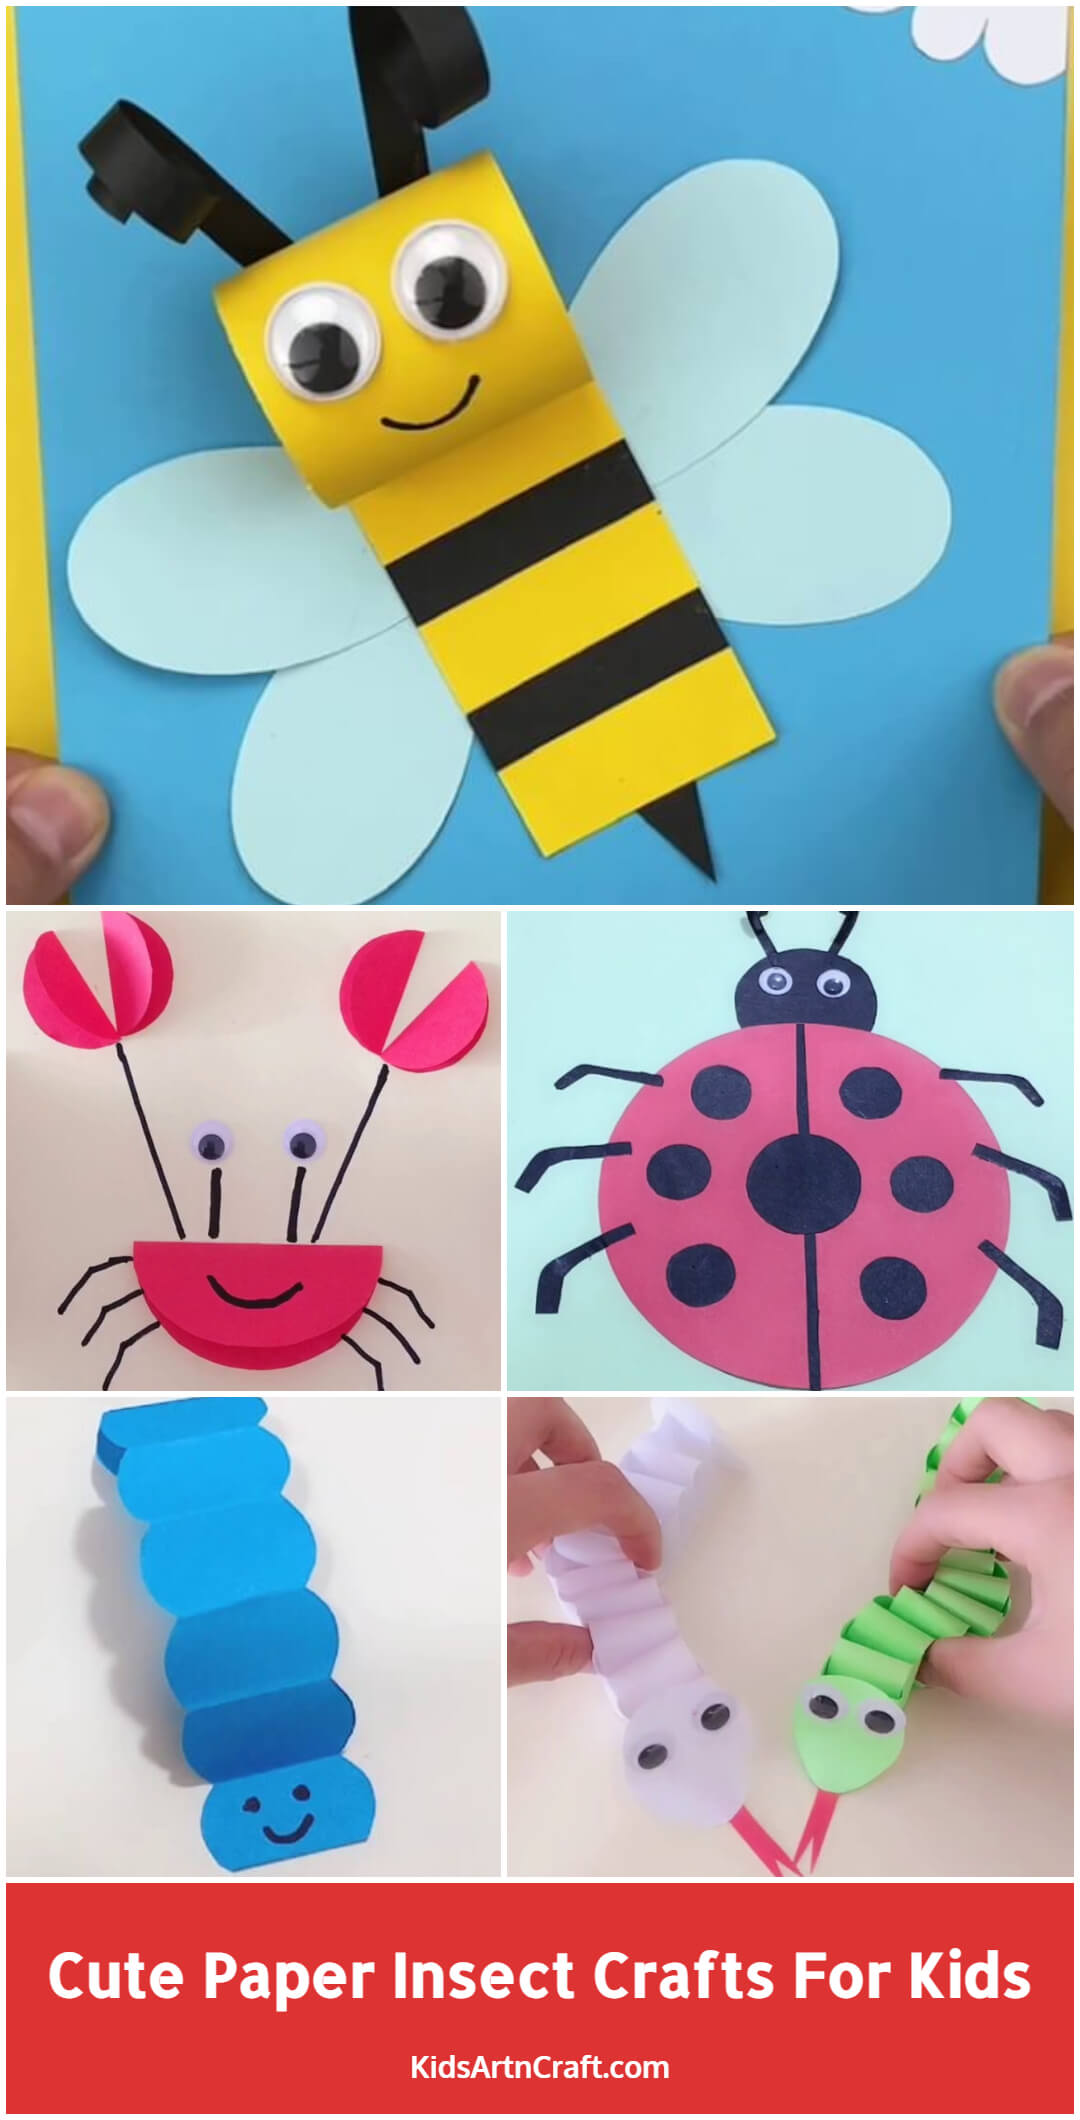 Cute Paper Insect Crafts For Kids